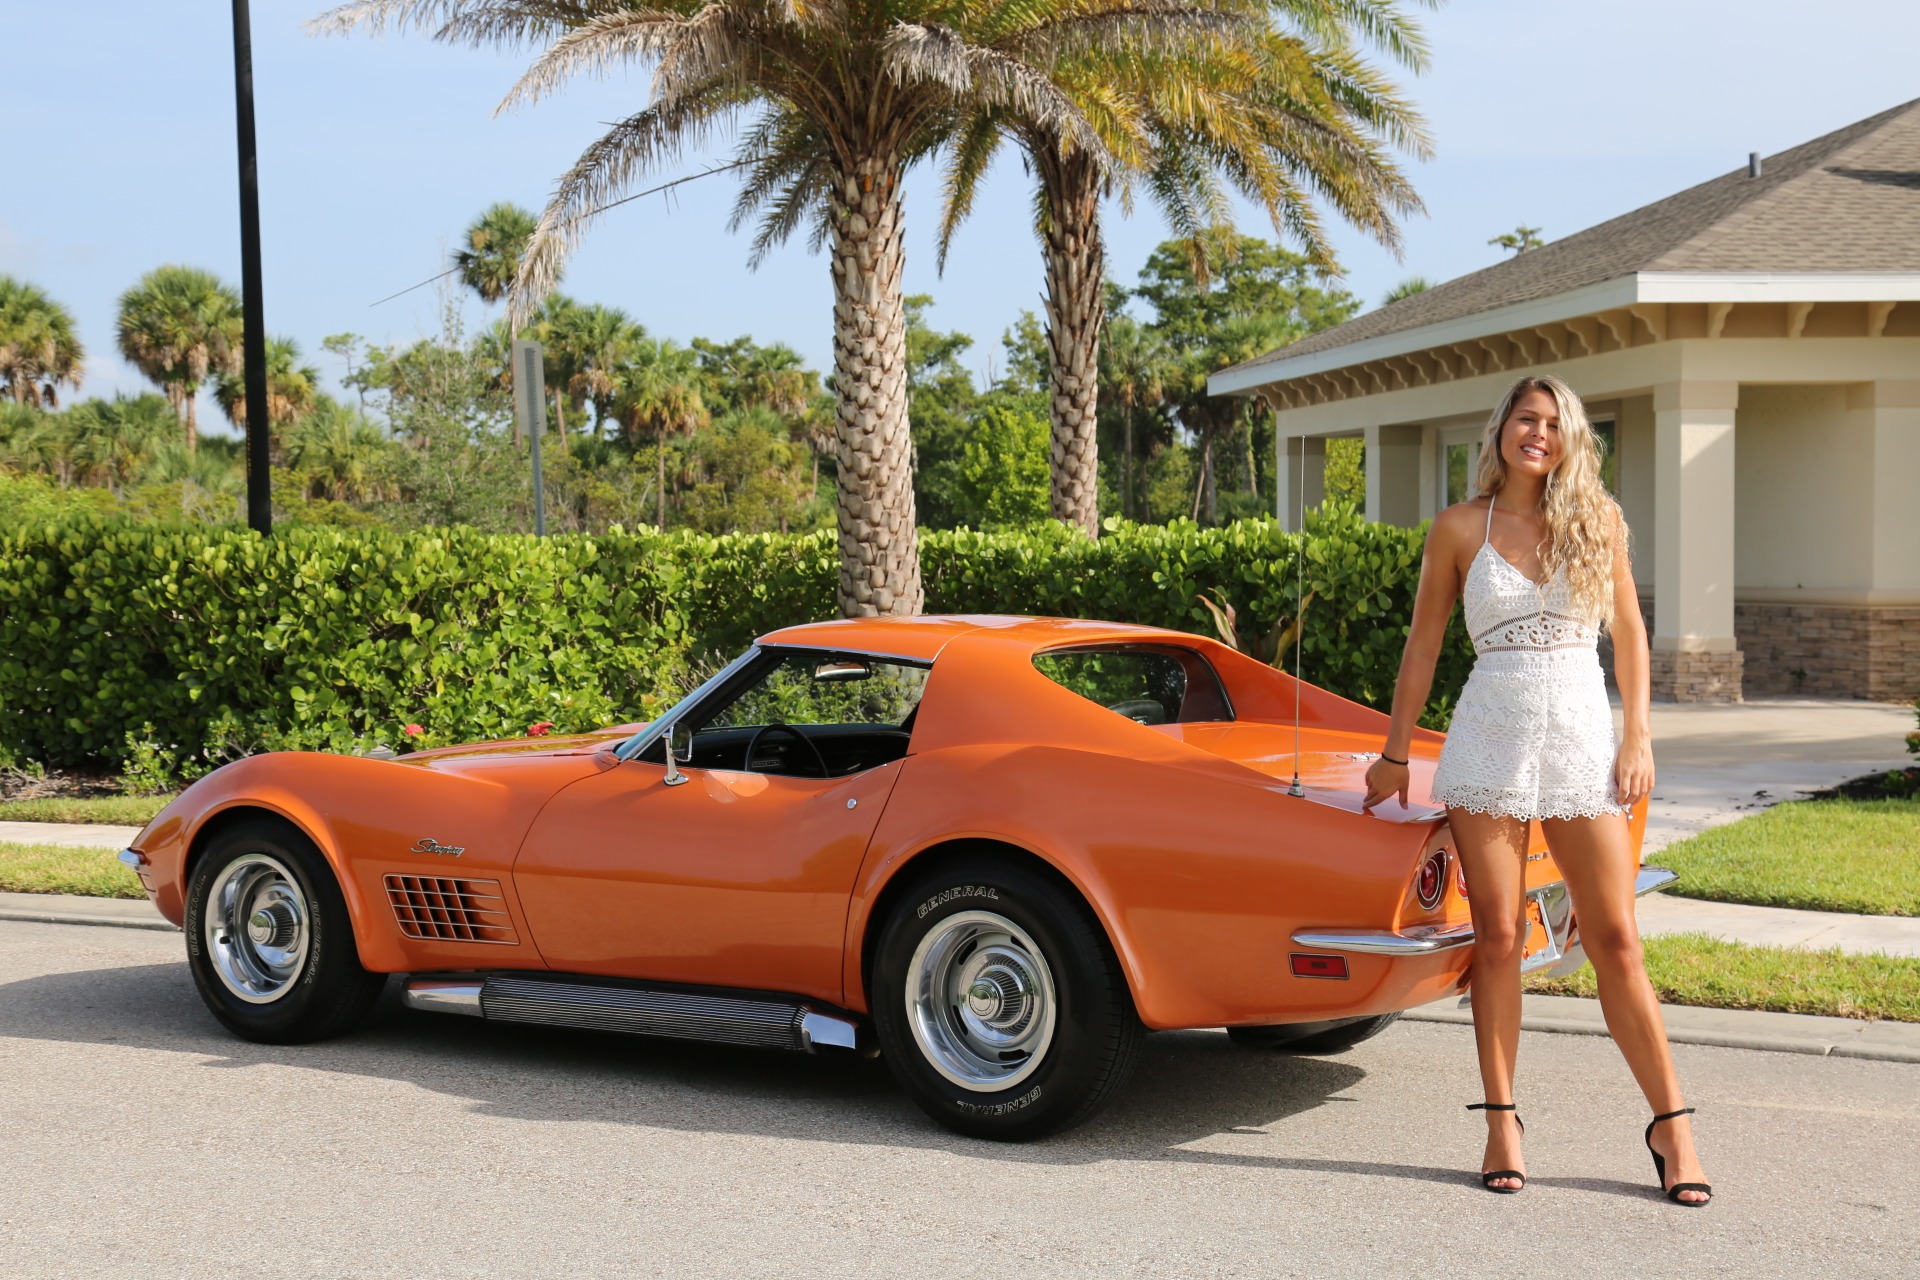 Used 1971 Chevy Corvette Removable rear Glass and T Top 4 speed for sale Sold at Muscle Cars for Sale Inc. in Fort Myers FL 33912 4